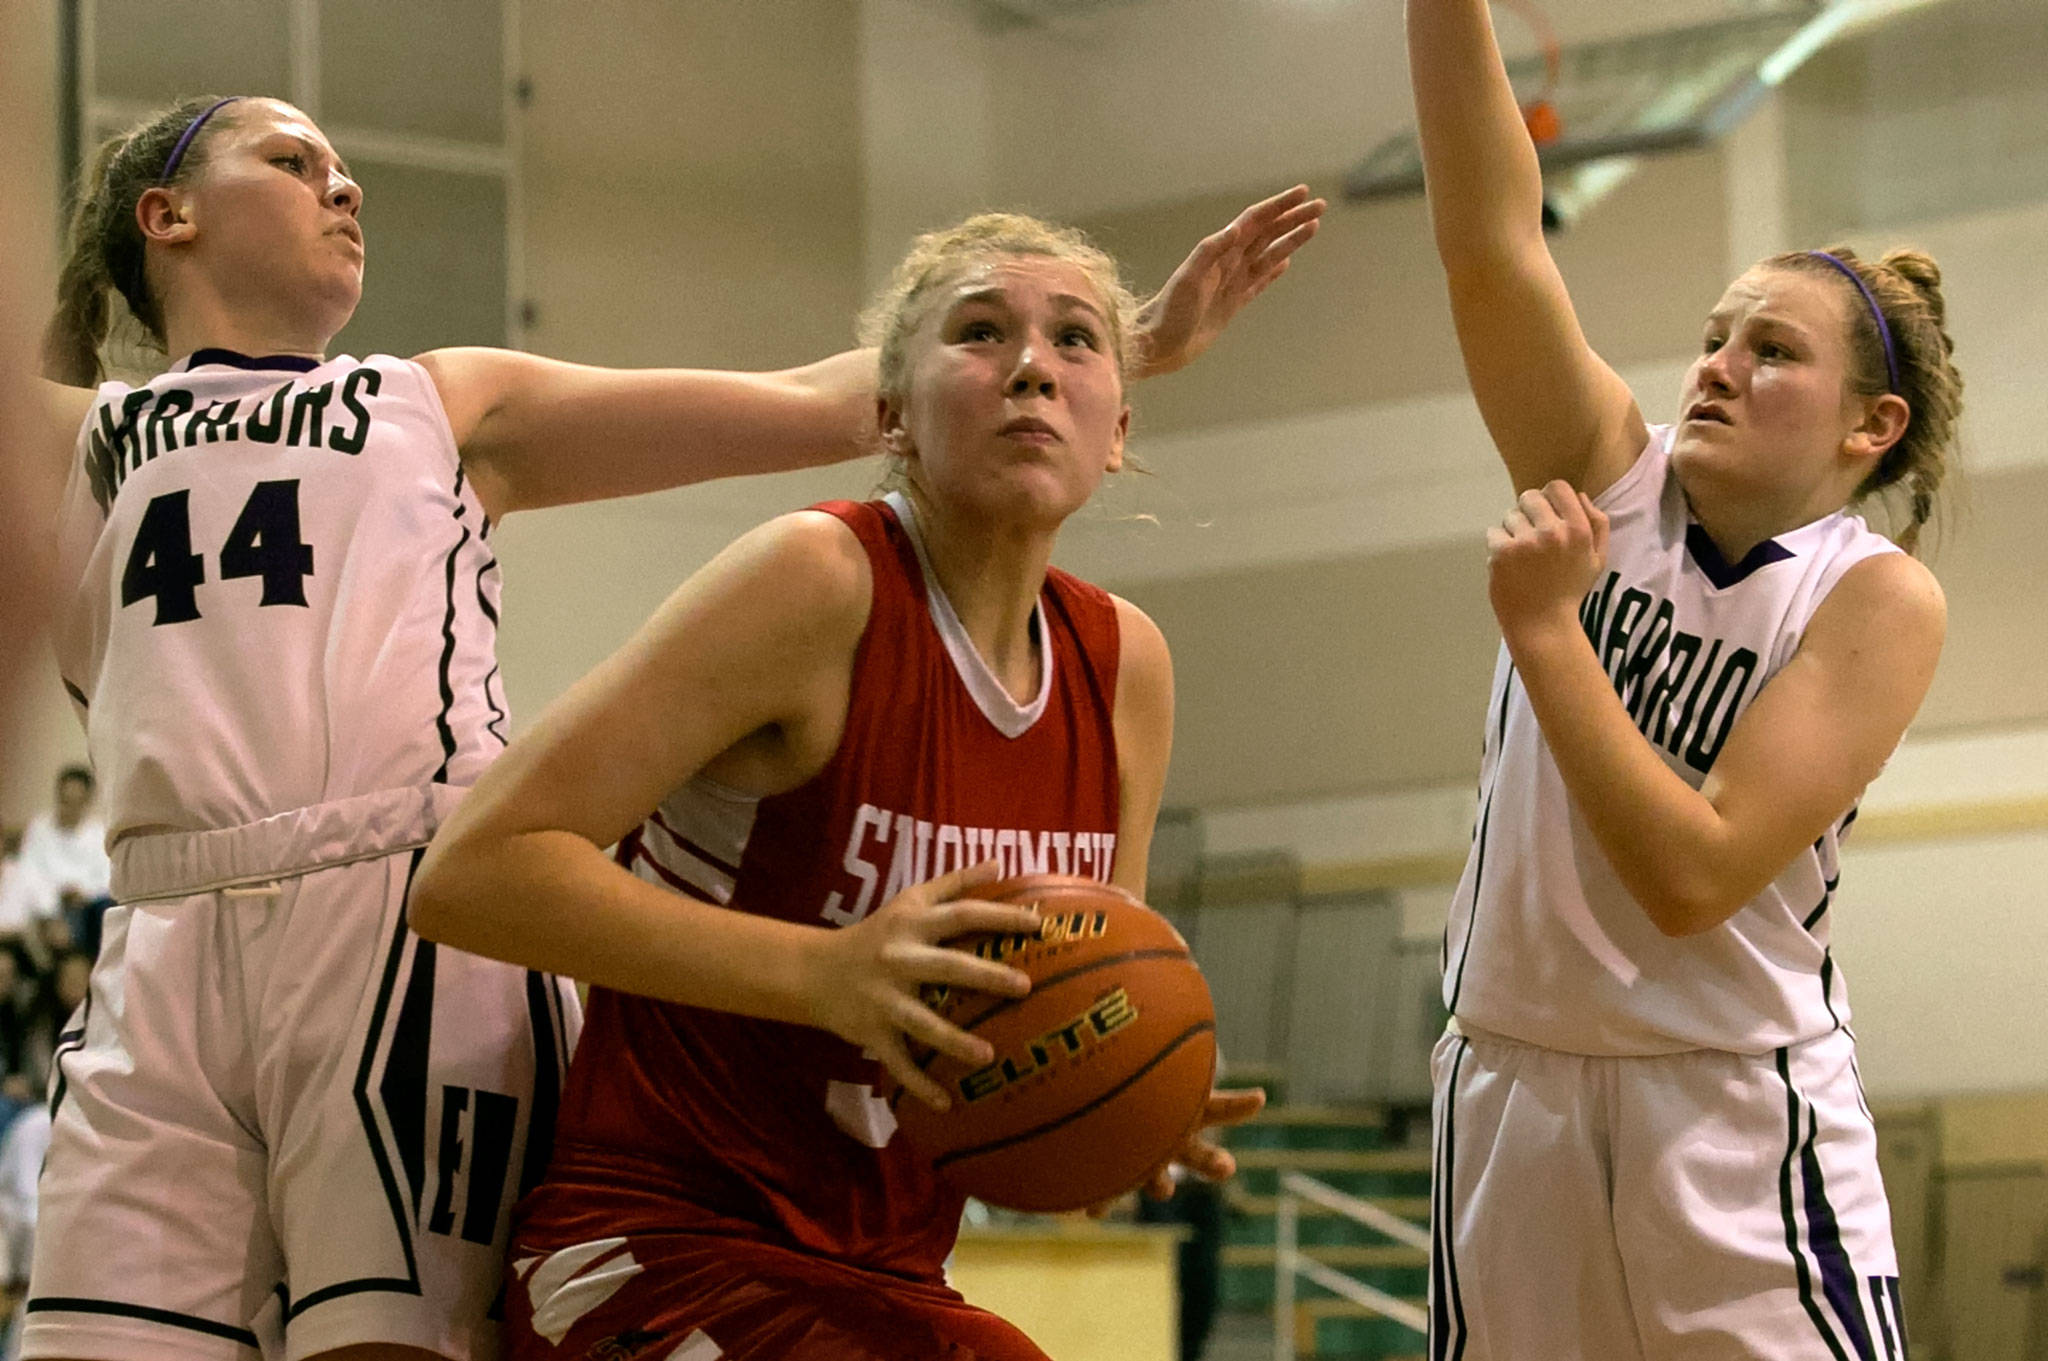 Snohomish’s Kyra Beckman (center) gathers for a shot attempt with Edmonds-Woodway’s Adrienne Poling (left) and AJ Martineau defending during a game Jan. 12, 2018, at Edmonds-Woodway High School. The Panthers won 66-64. (Kevin Clark / The Herald)